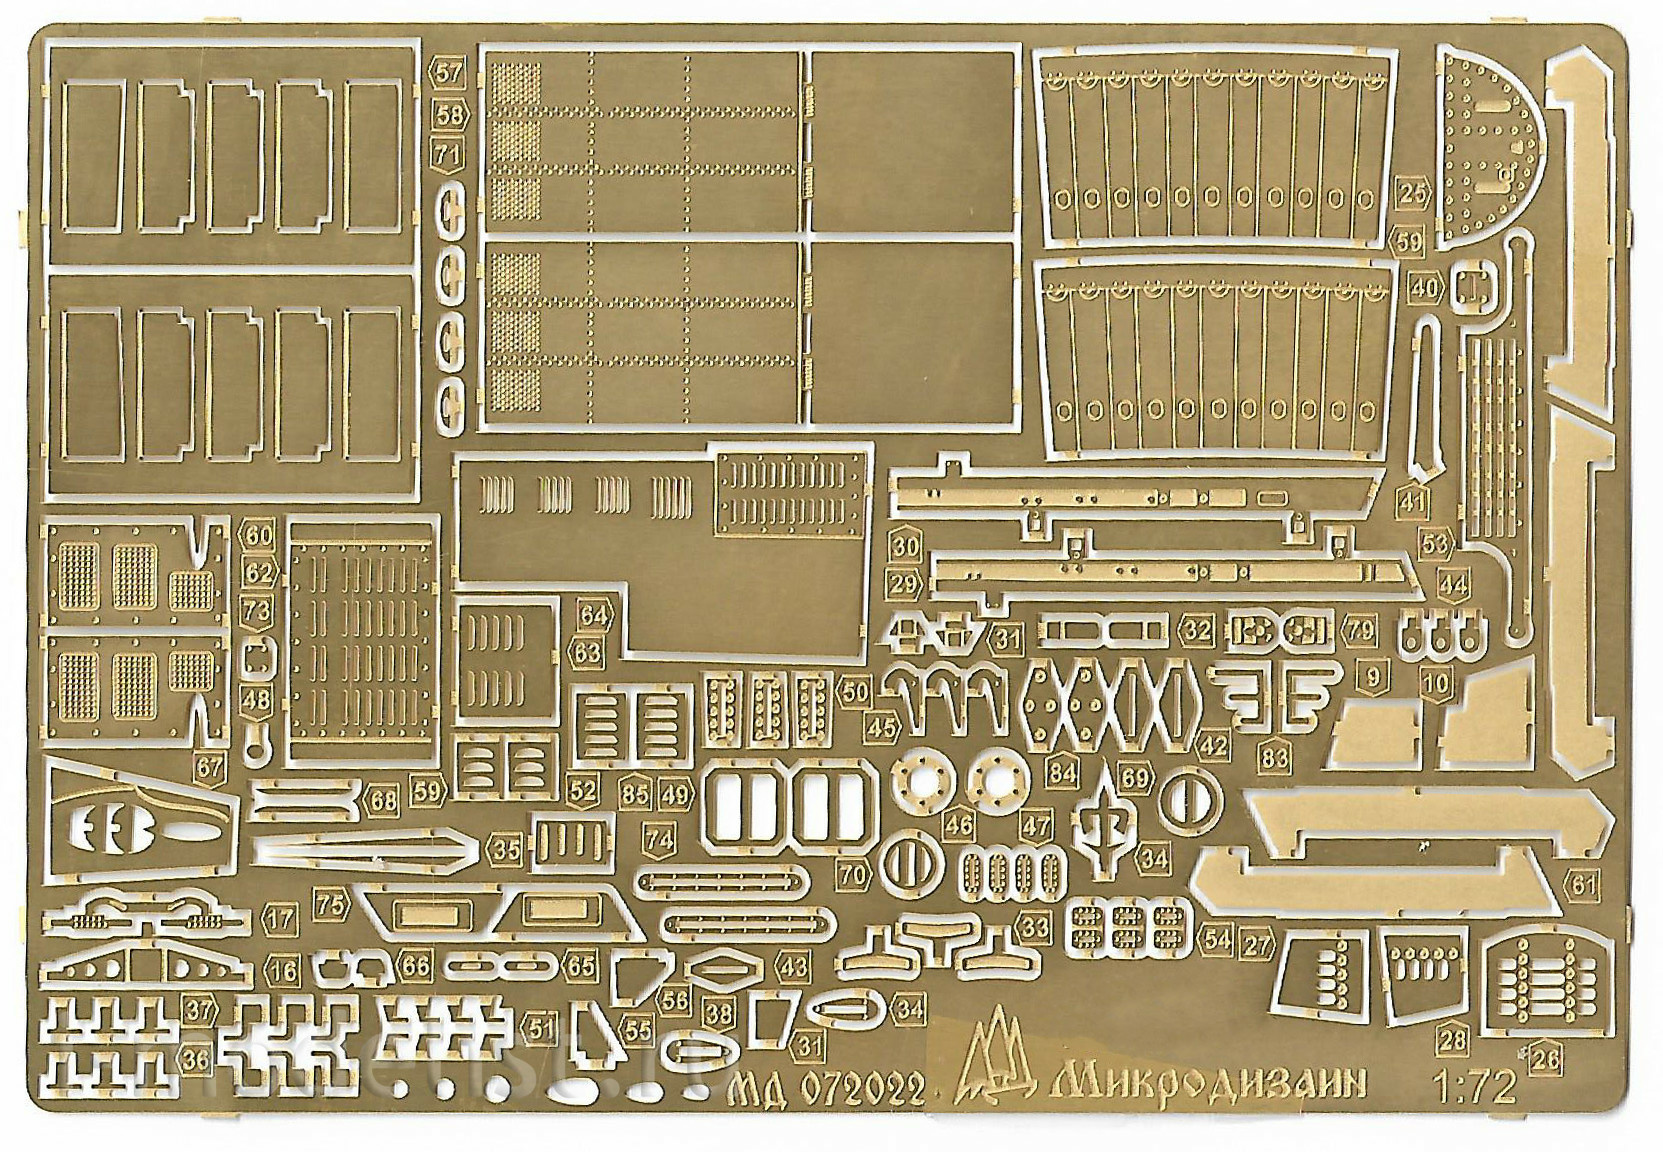 072022 Micro Design 1/72 Set of color photo etching cabin MiGG-29/Migg-29SMT